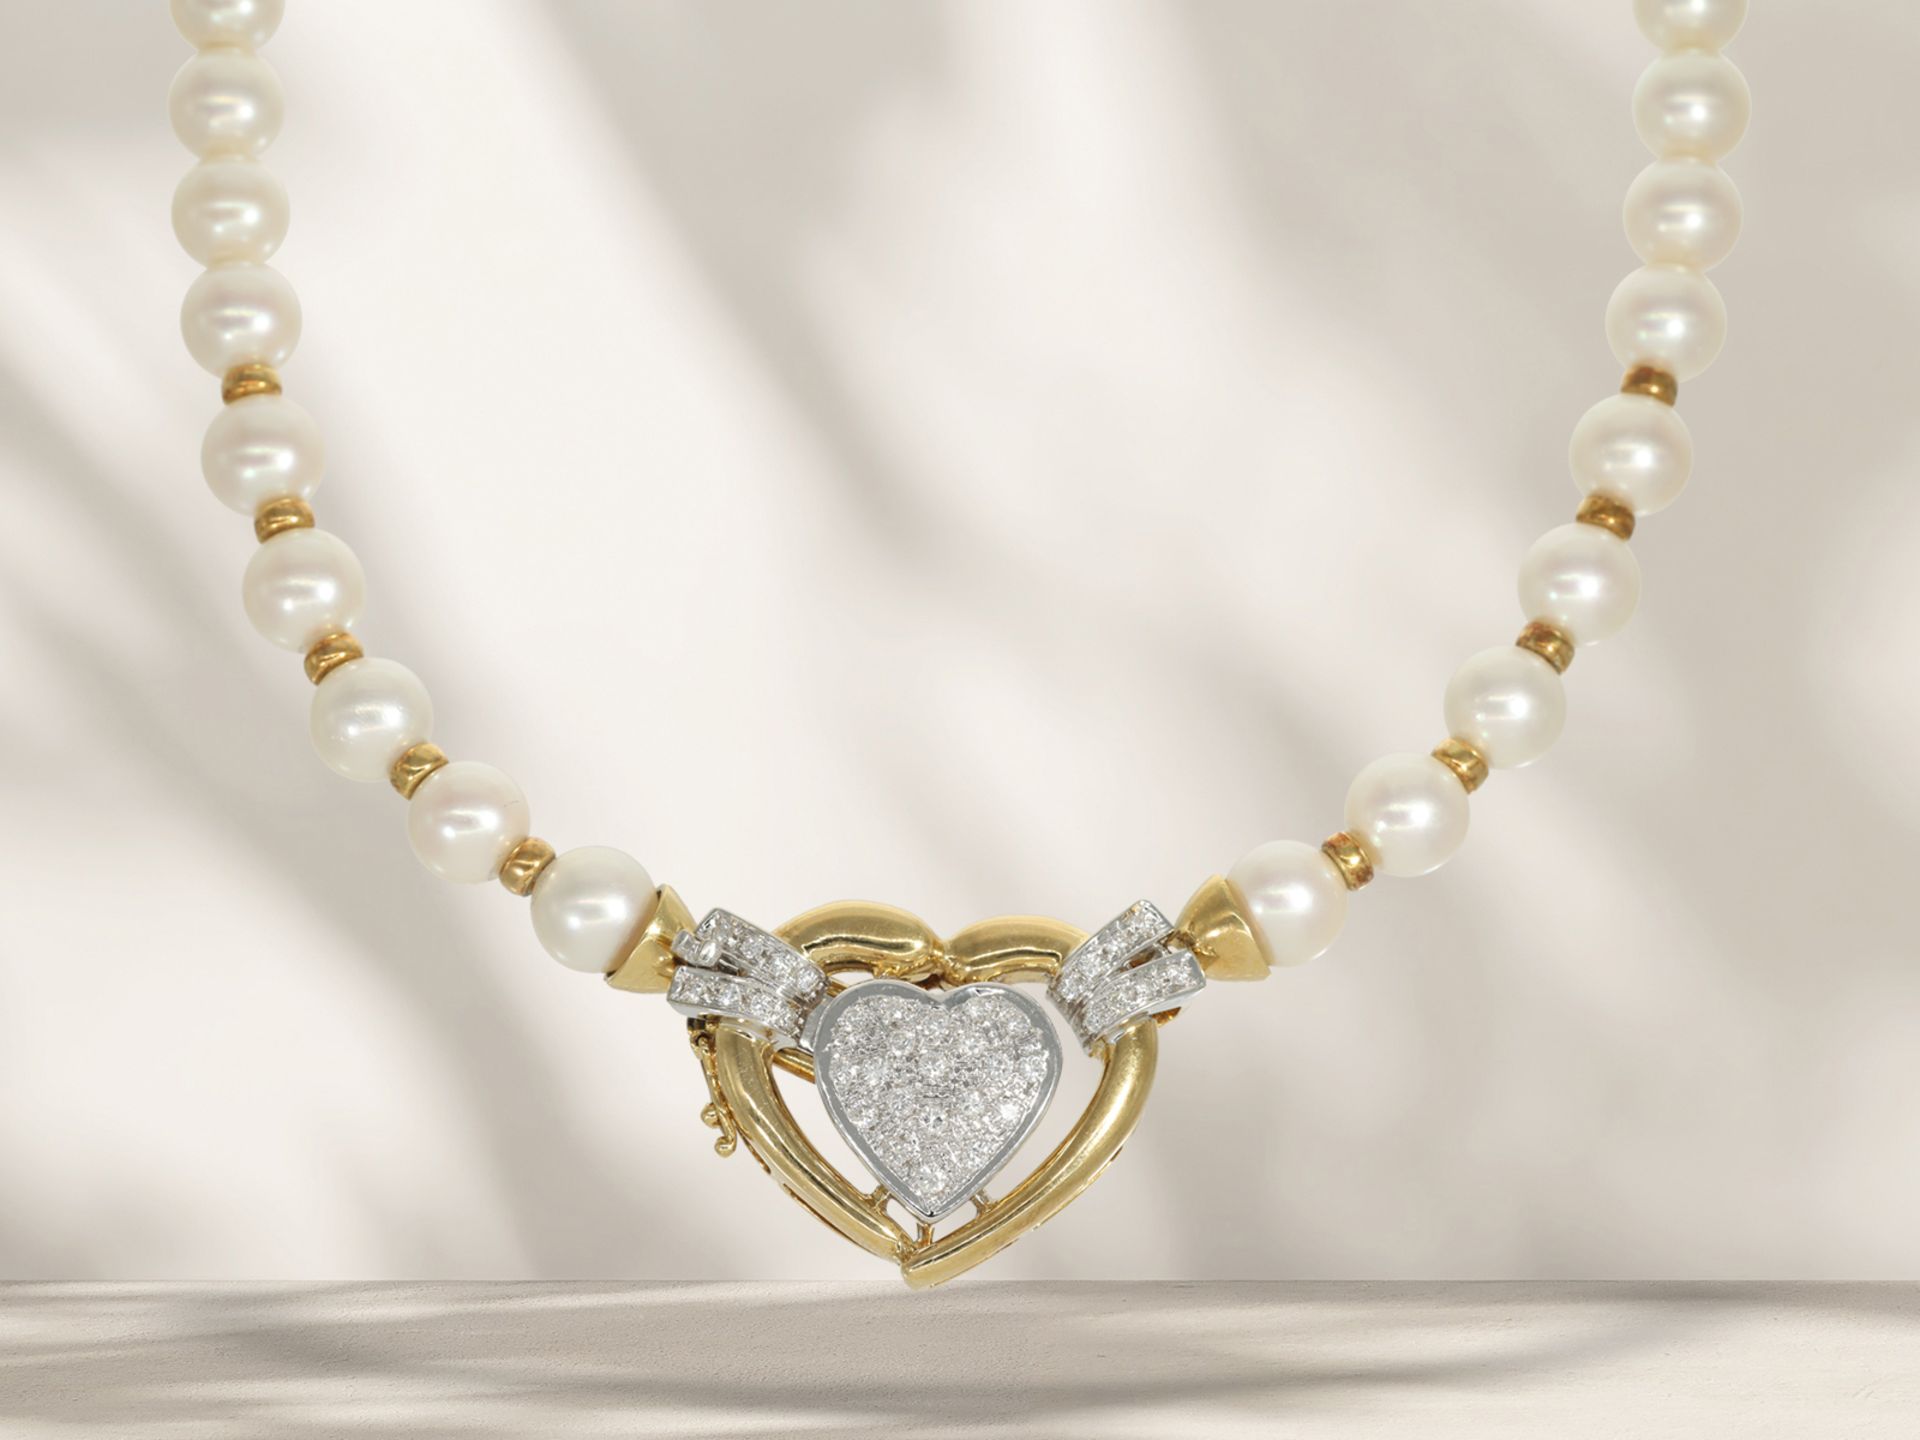 Valuable vintage cultured pearl necklace by Wempe with decorative 18K diamond clasp in heart shape